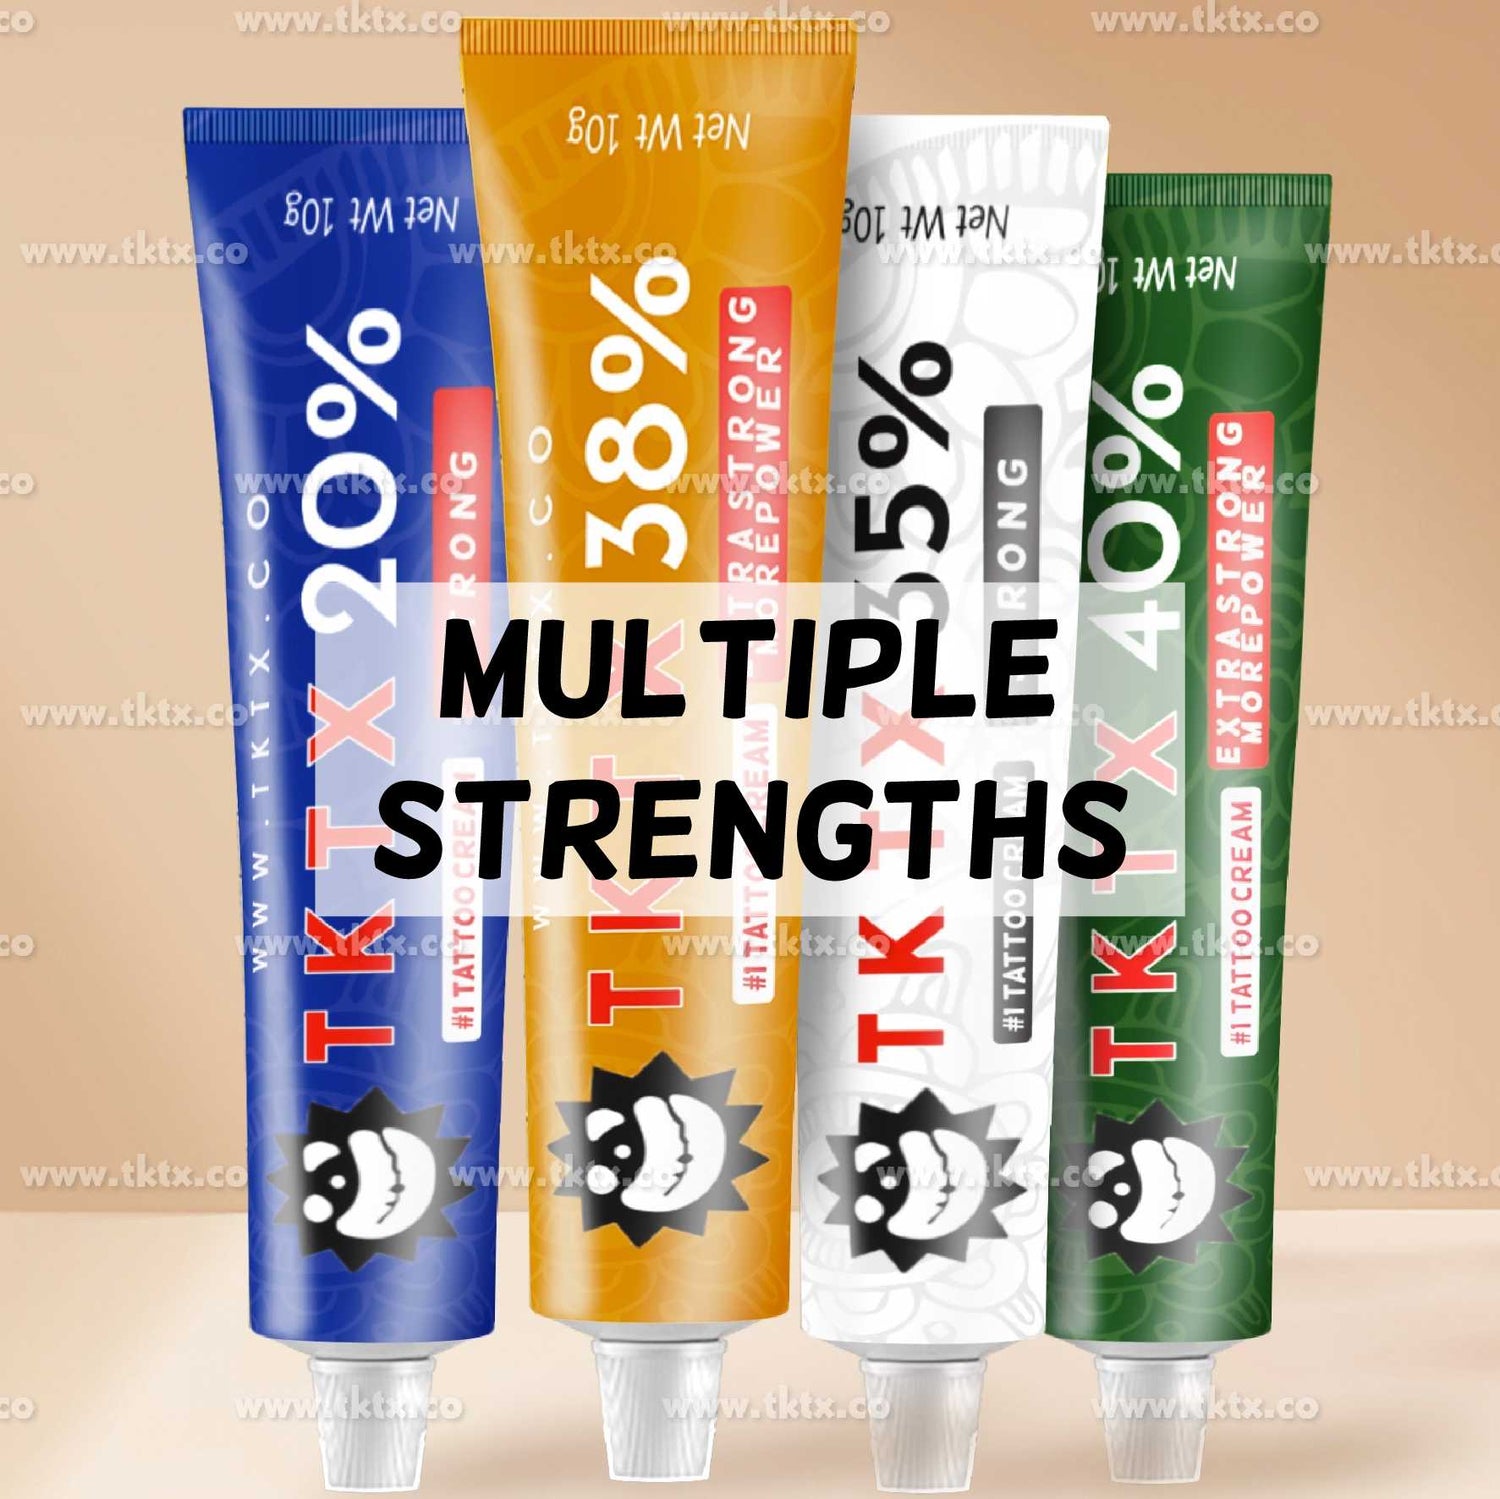 TKTX 38% Gold - EXTRA STRONG - Numbing Cream TKTX